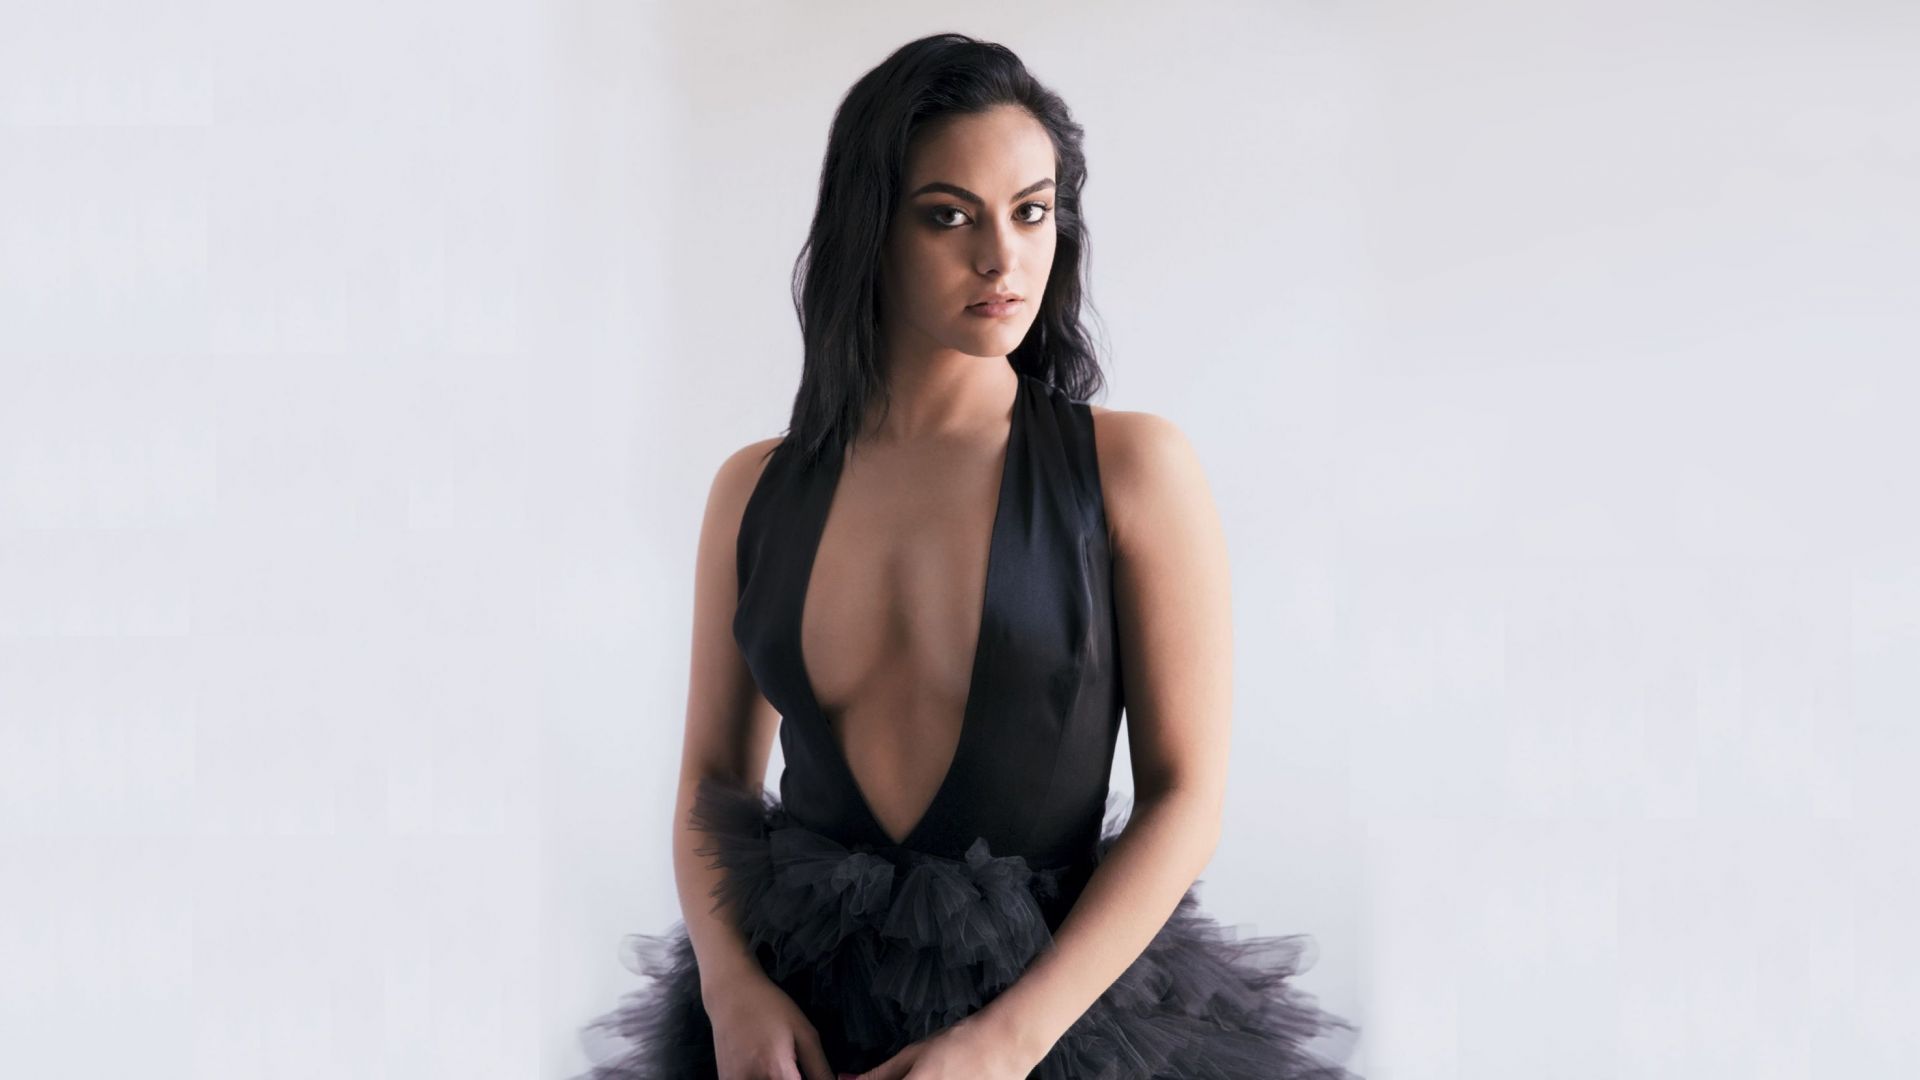 5K Camila Mendes 2020 Wallpapers